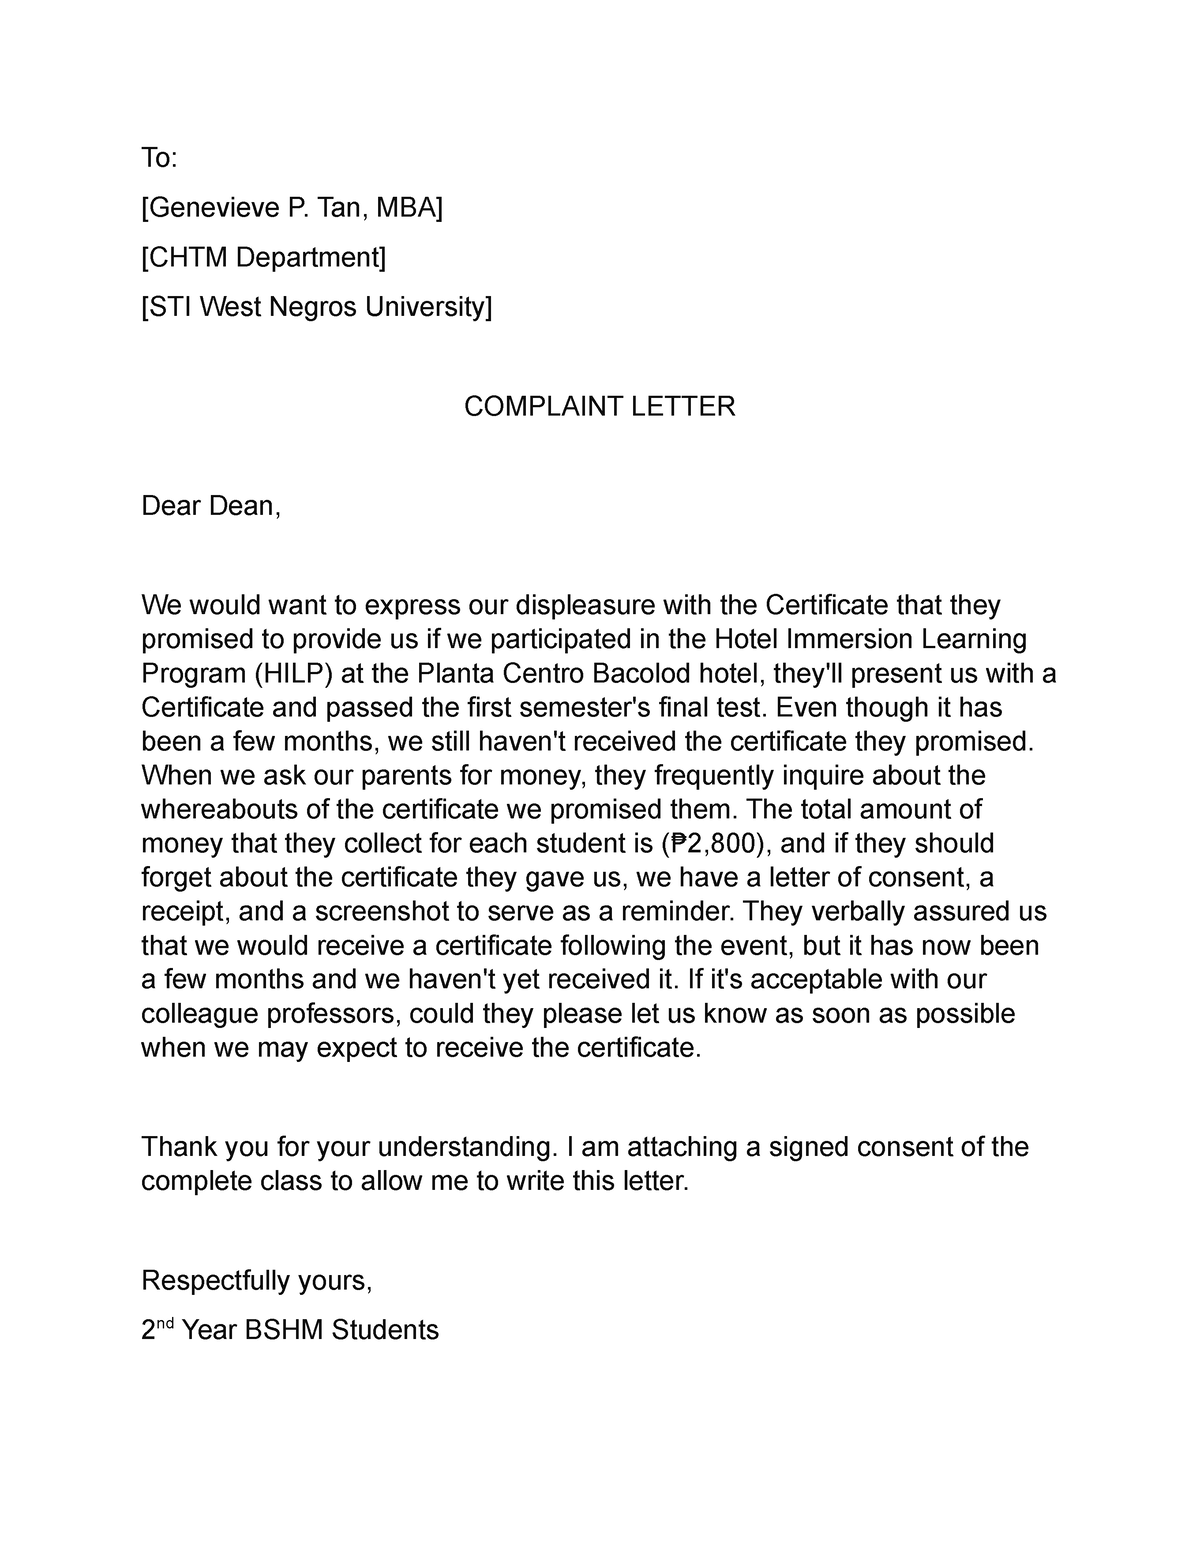 Complaint Letter - To: [Genevieve P. Tan, MBA] [CHTM Department] [STI ...